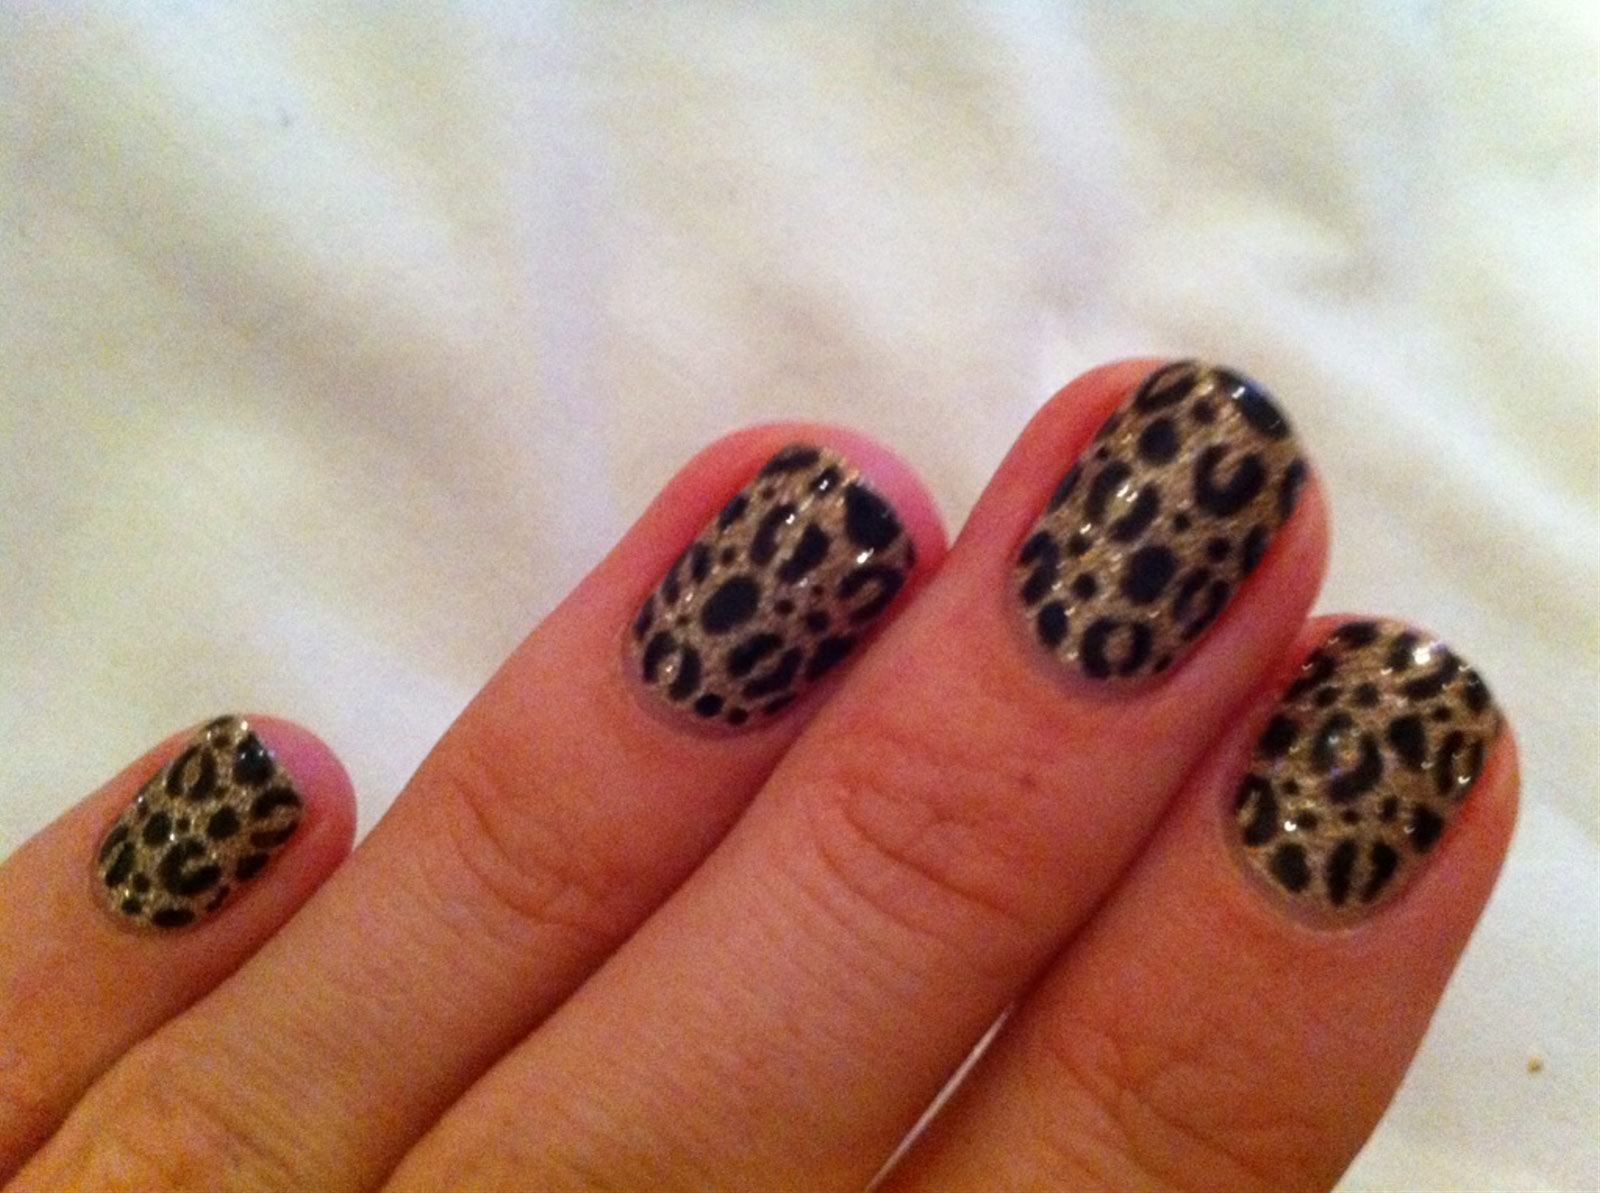 Brush up and Polish up!: CND Shellac Nail Art - Even more Leopard Print!